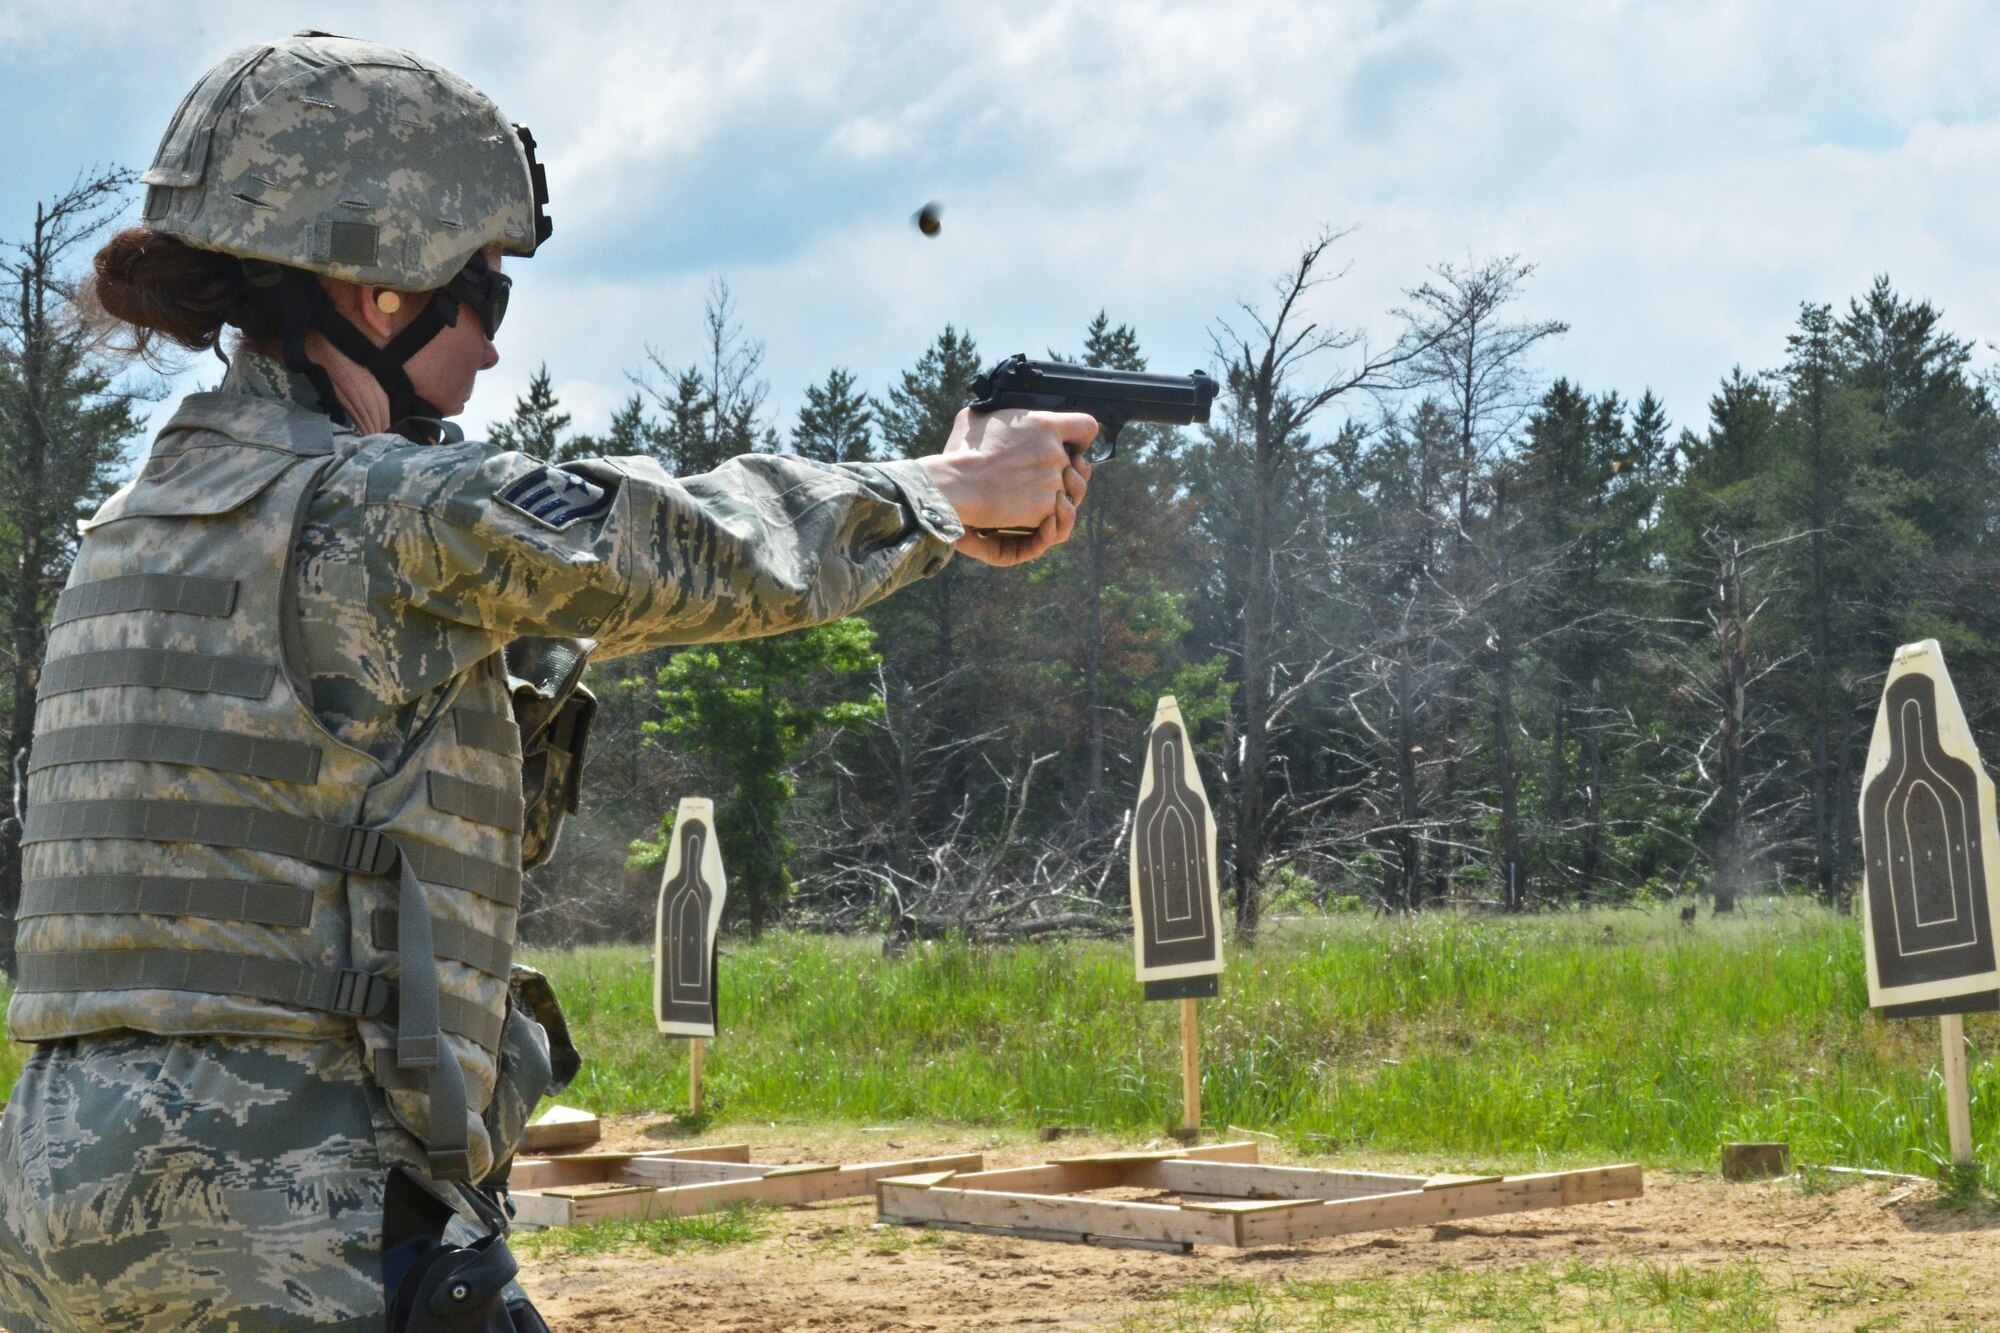 U.S. Air Force Staff Sgt. Linda Kosterman, a security forces member with the 128th Air Refueling Wing, Wisconsin Air National Guard, fires an M9 pistol during a weapons qualification course at Fort McCoy, Wis., June 10, 2013.  Members of the 128th Security Forces Squadron conducted annual training at Total Force Training Center Fort McCoy.  (U.S. Air National Guard photo by Staff Sgt. Jenna Hildebrand/Released)